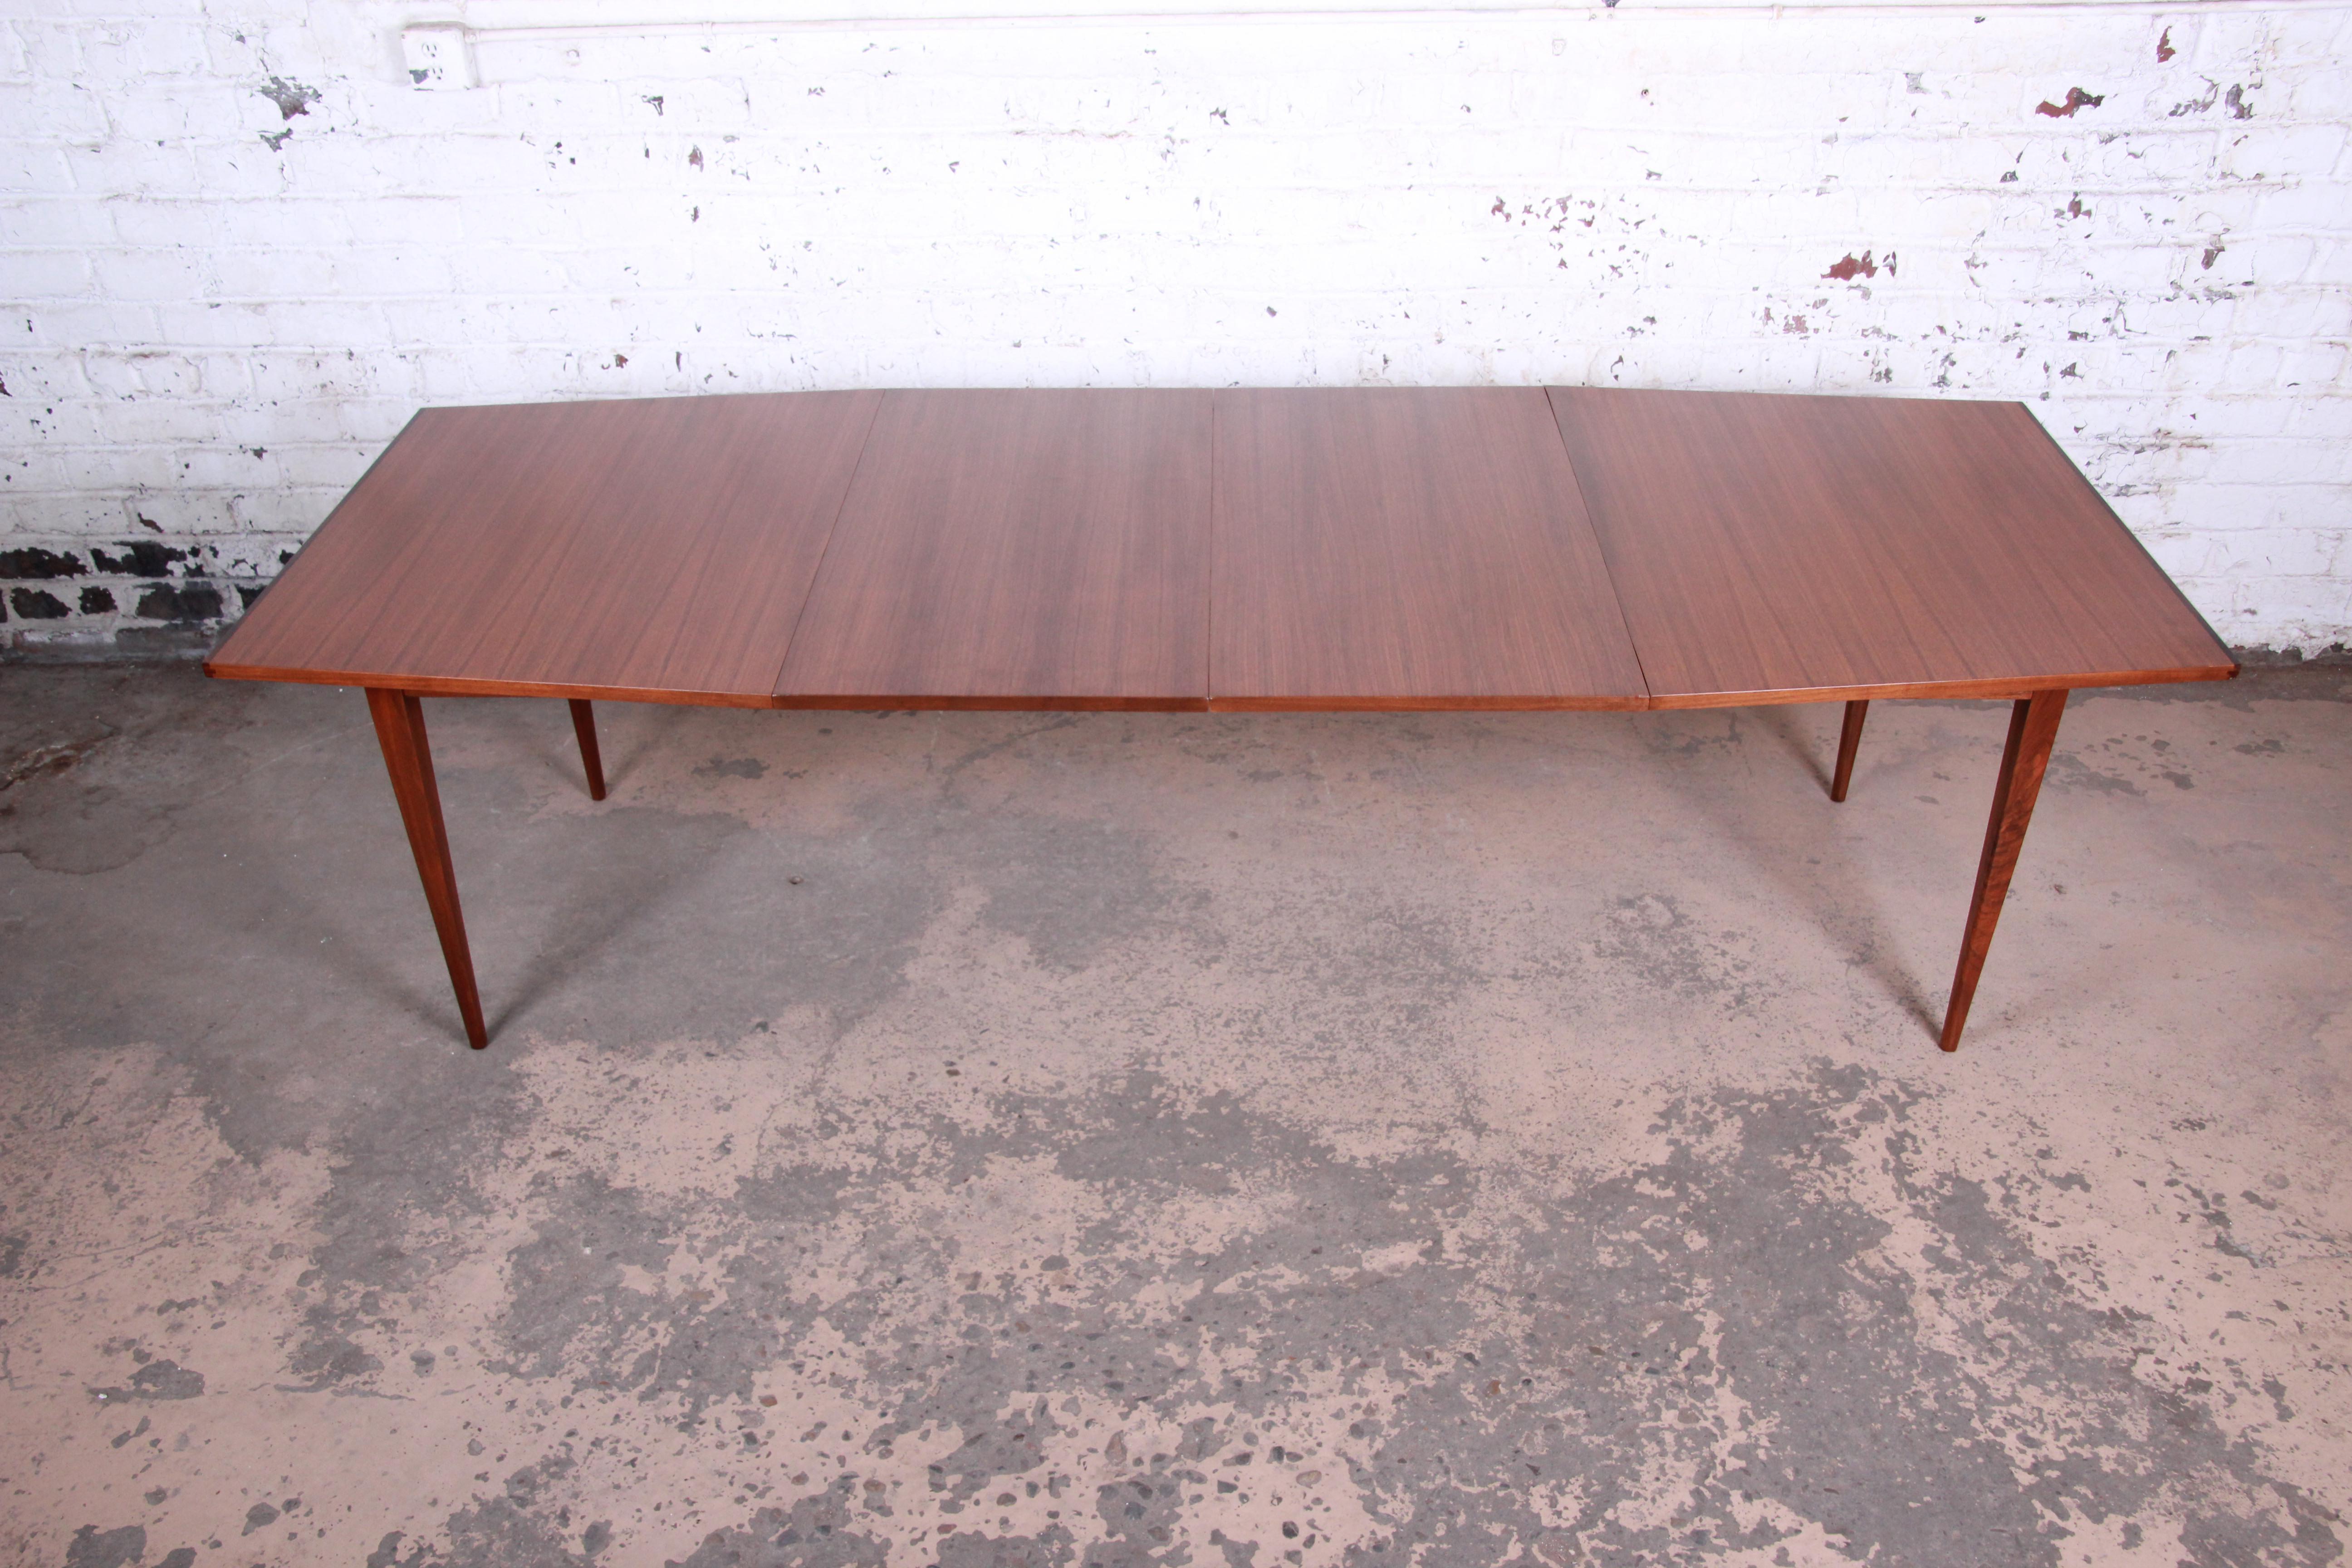 A rare and exceptional Mid-Century Modern boat-shaped extension dining table designed by Kipp Stewart for his American Design Foundation line for Calvin Furniture. The table features stunning walnut wood grain with rosewood edges, tapered solid